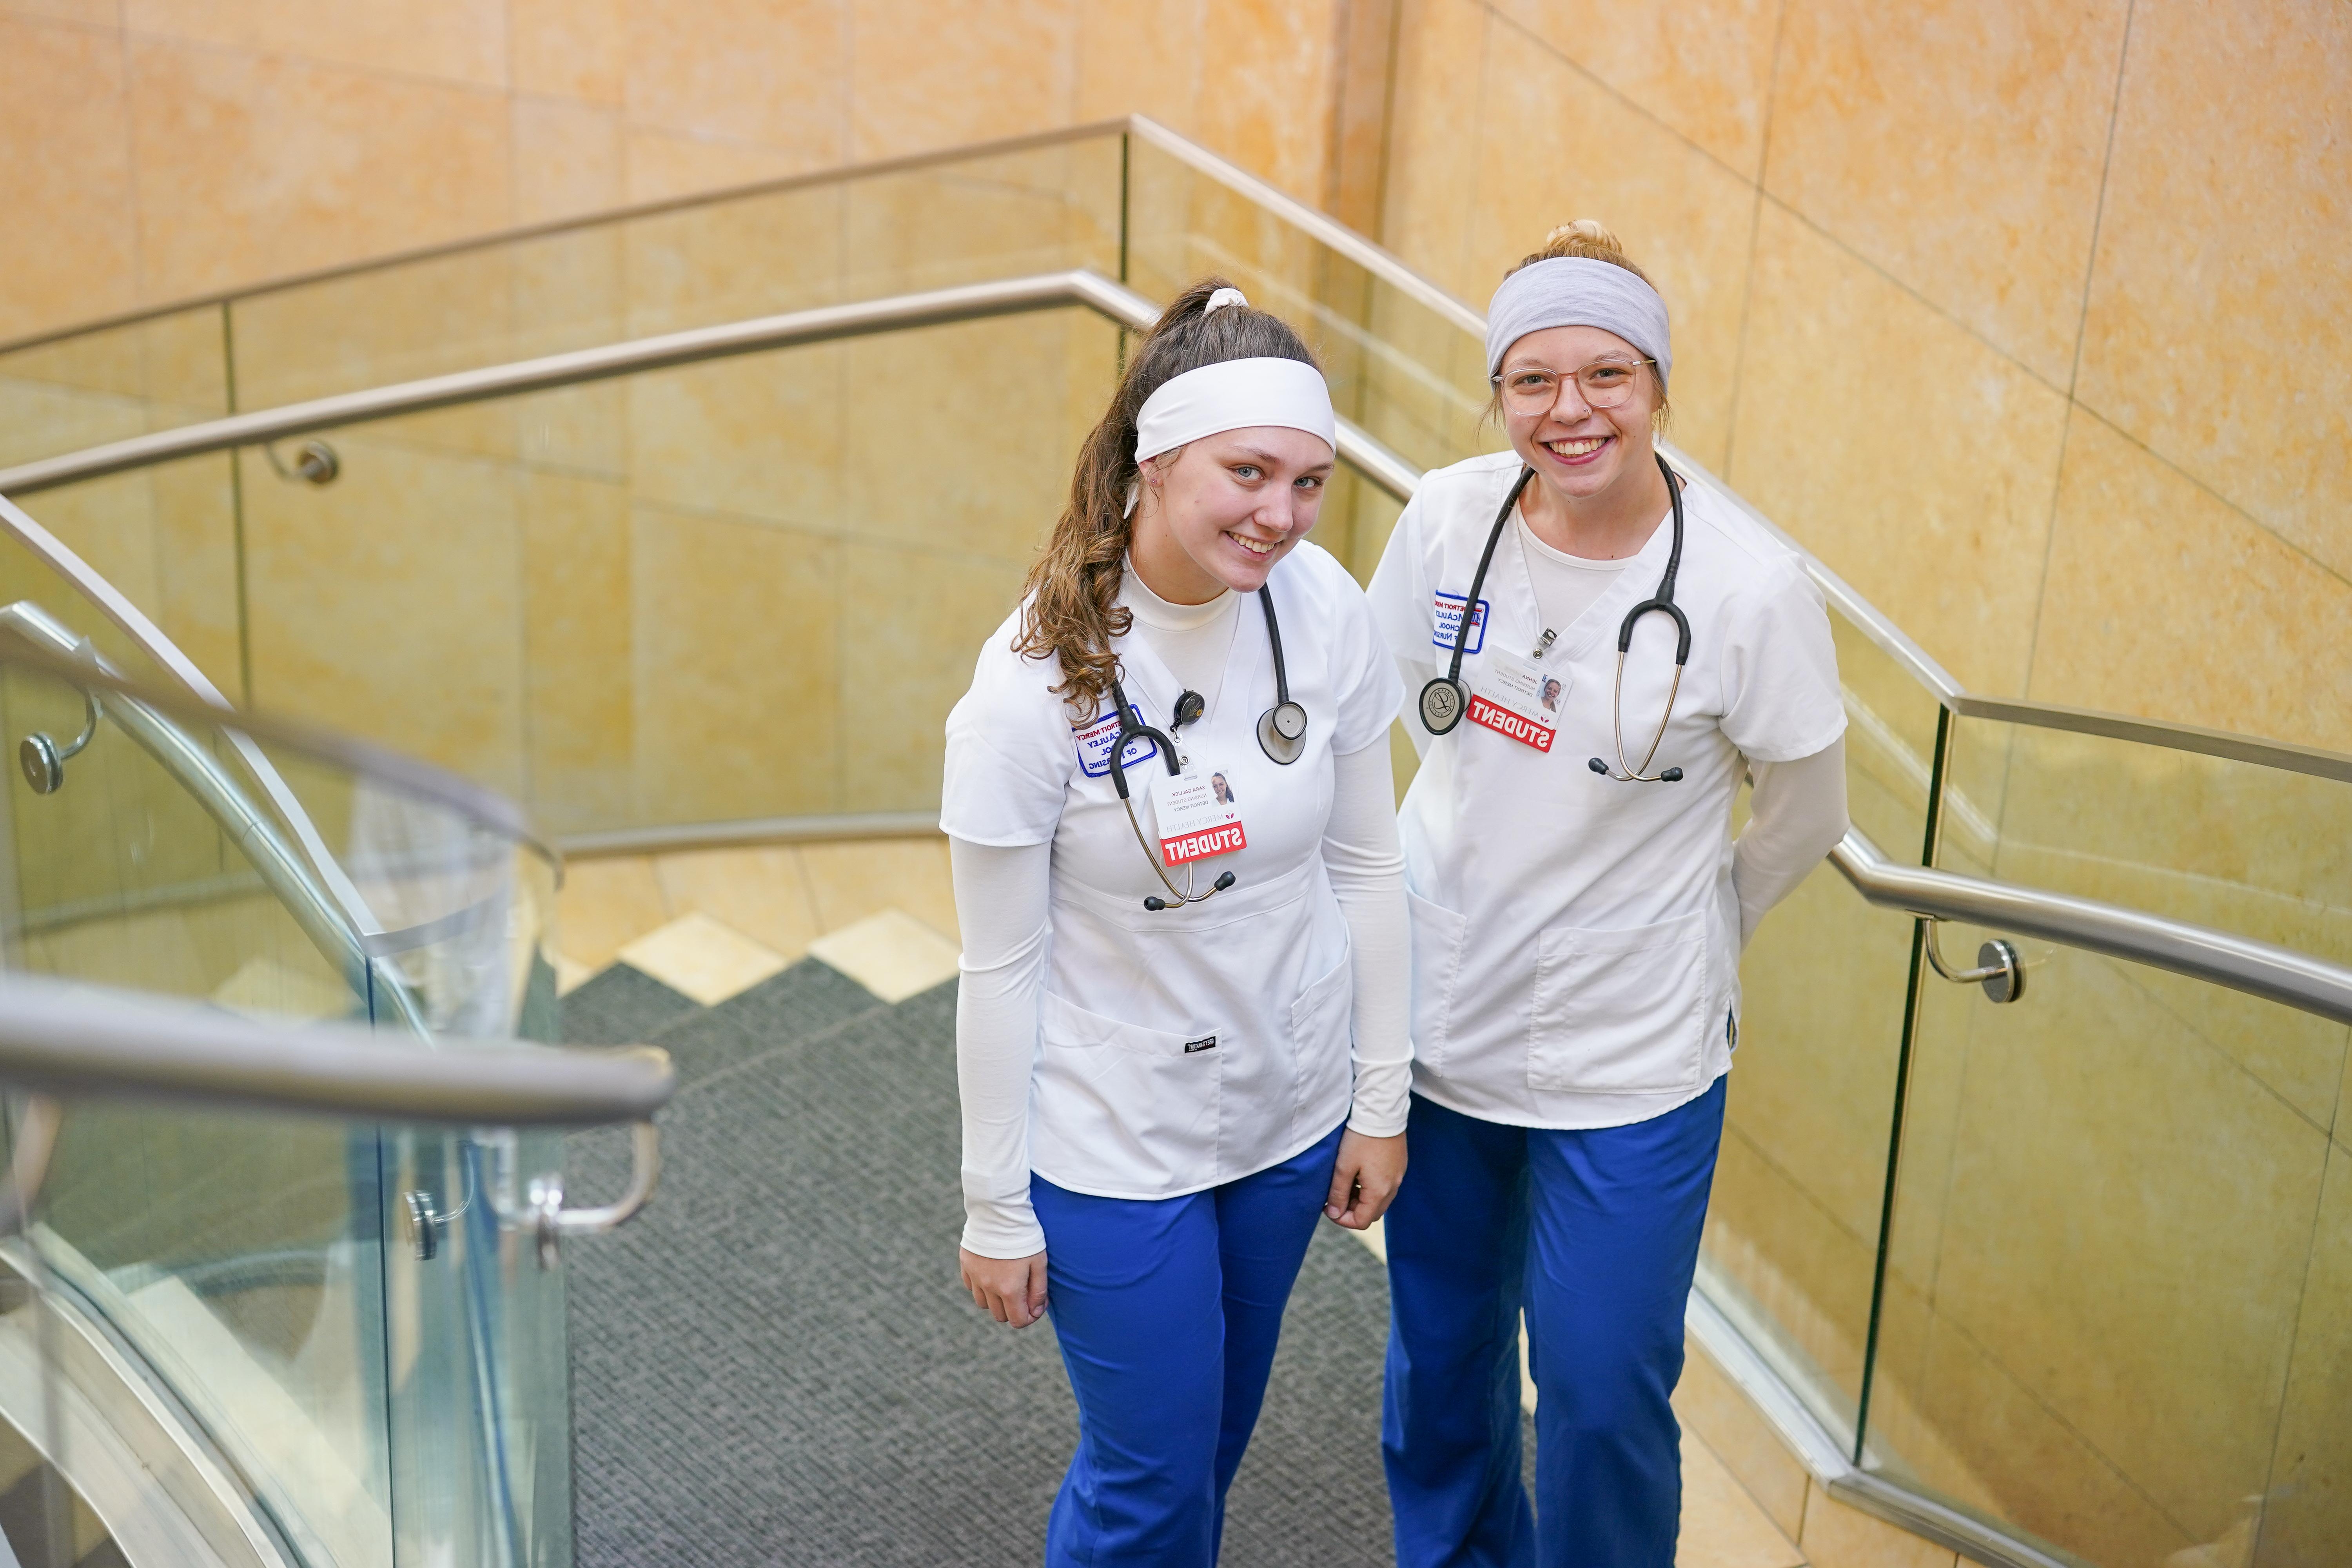 Two students in scrubs smiling